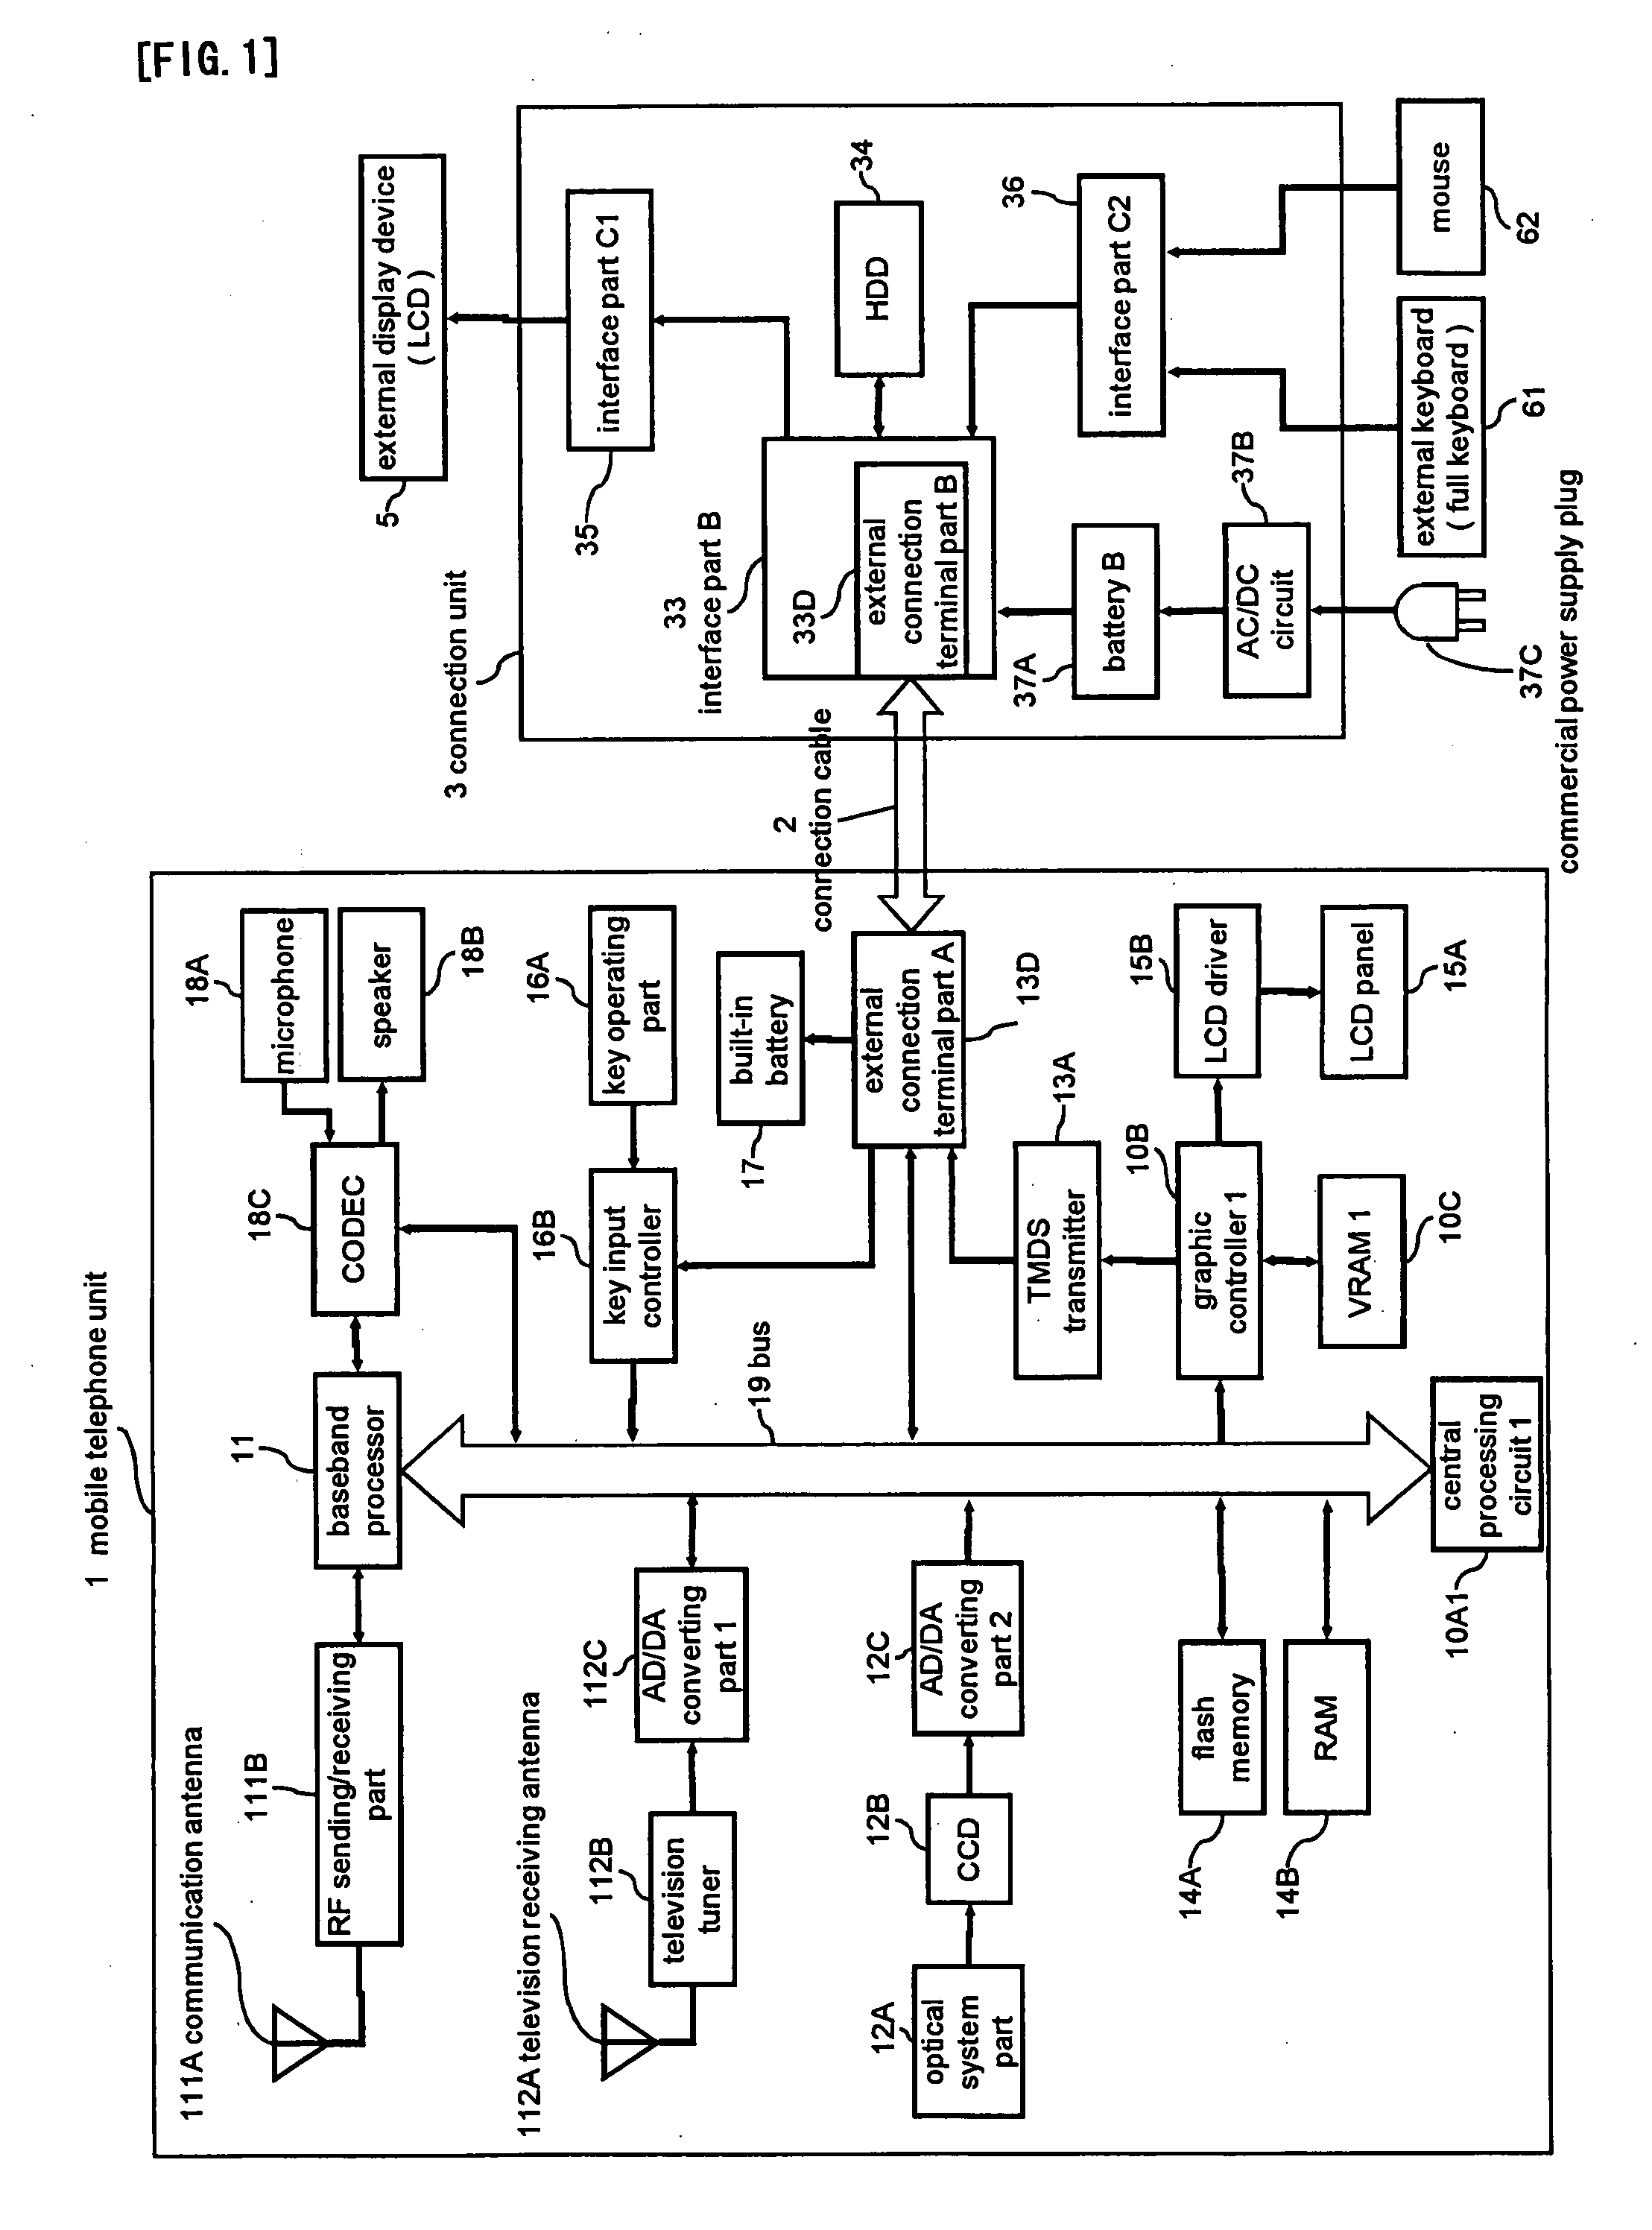 Mobile Information Communication Apparatus, Connection Unit for Mobile Information Communication Apparatus, and External Input/Output Unit for Mobile Information Communication Apparatus